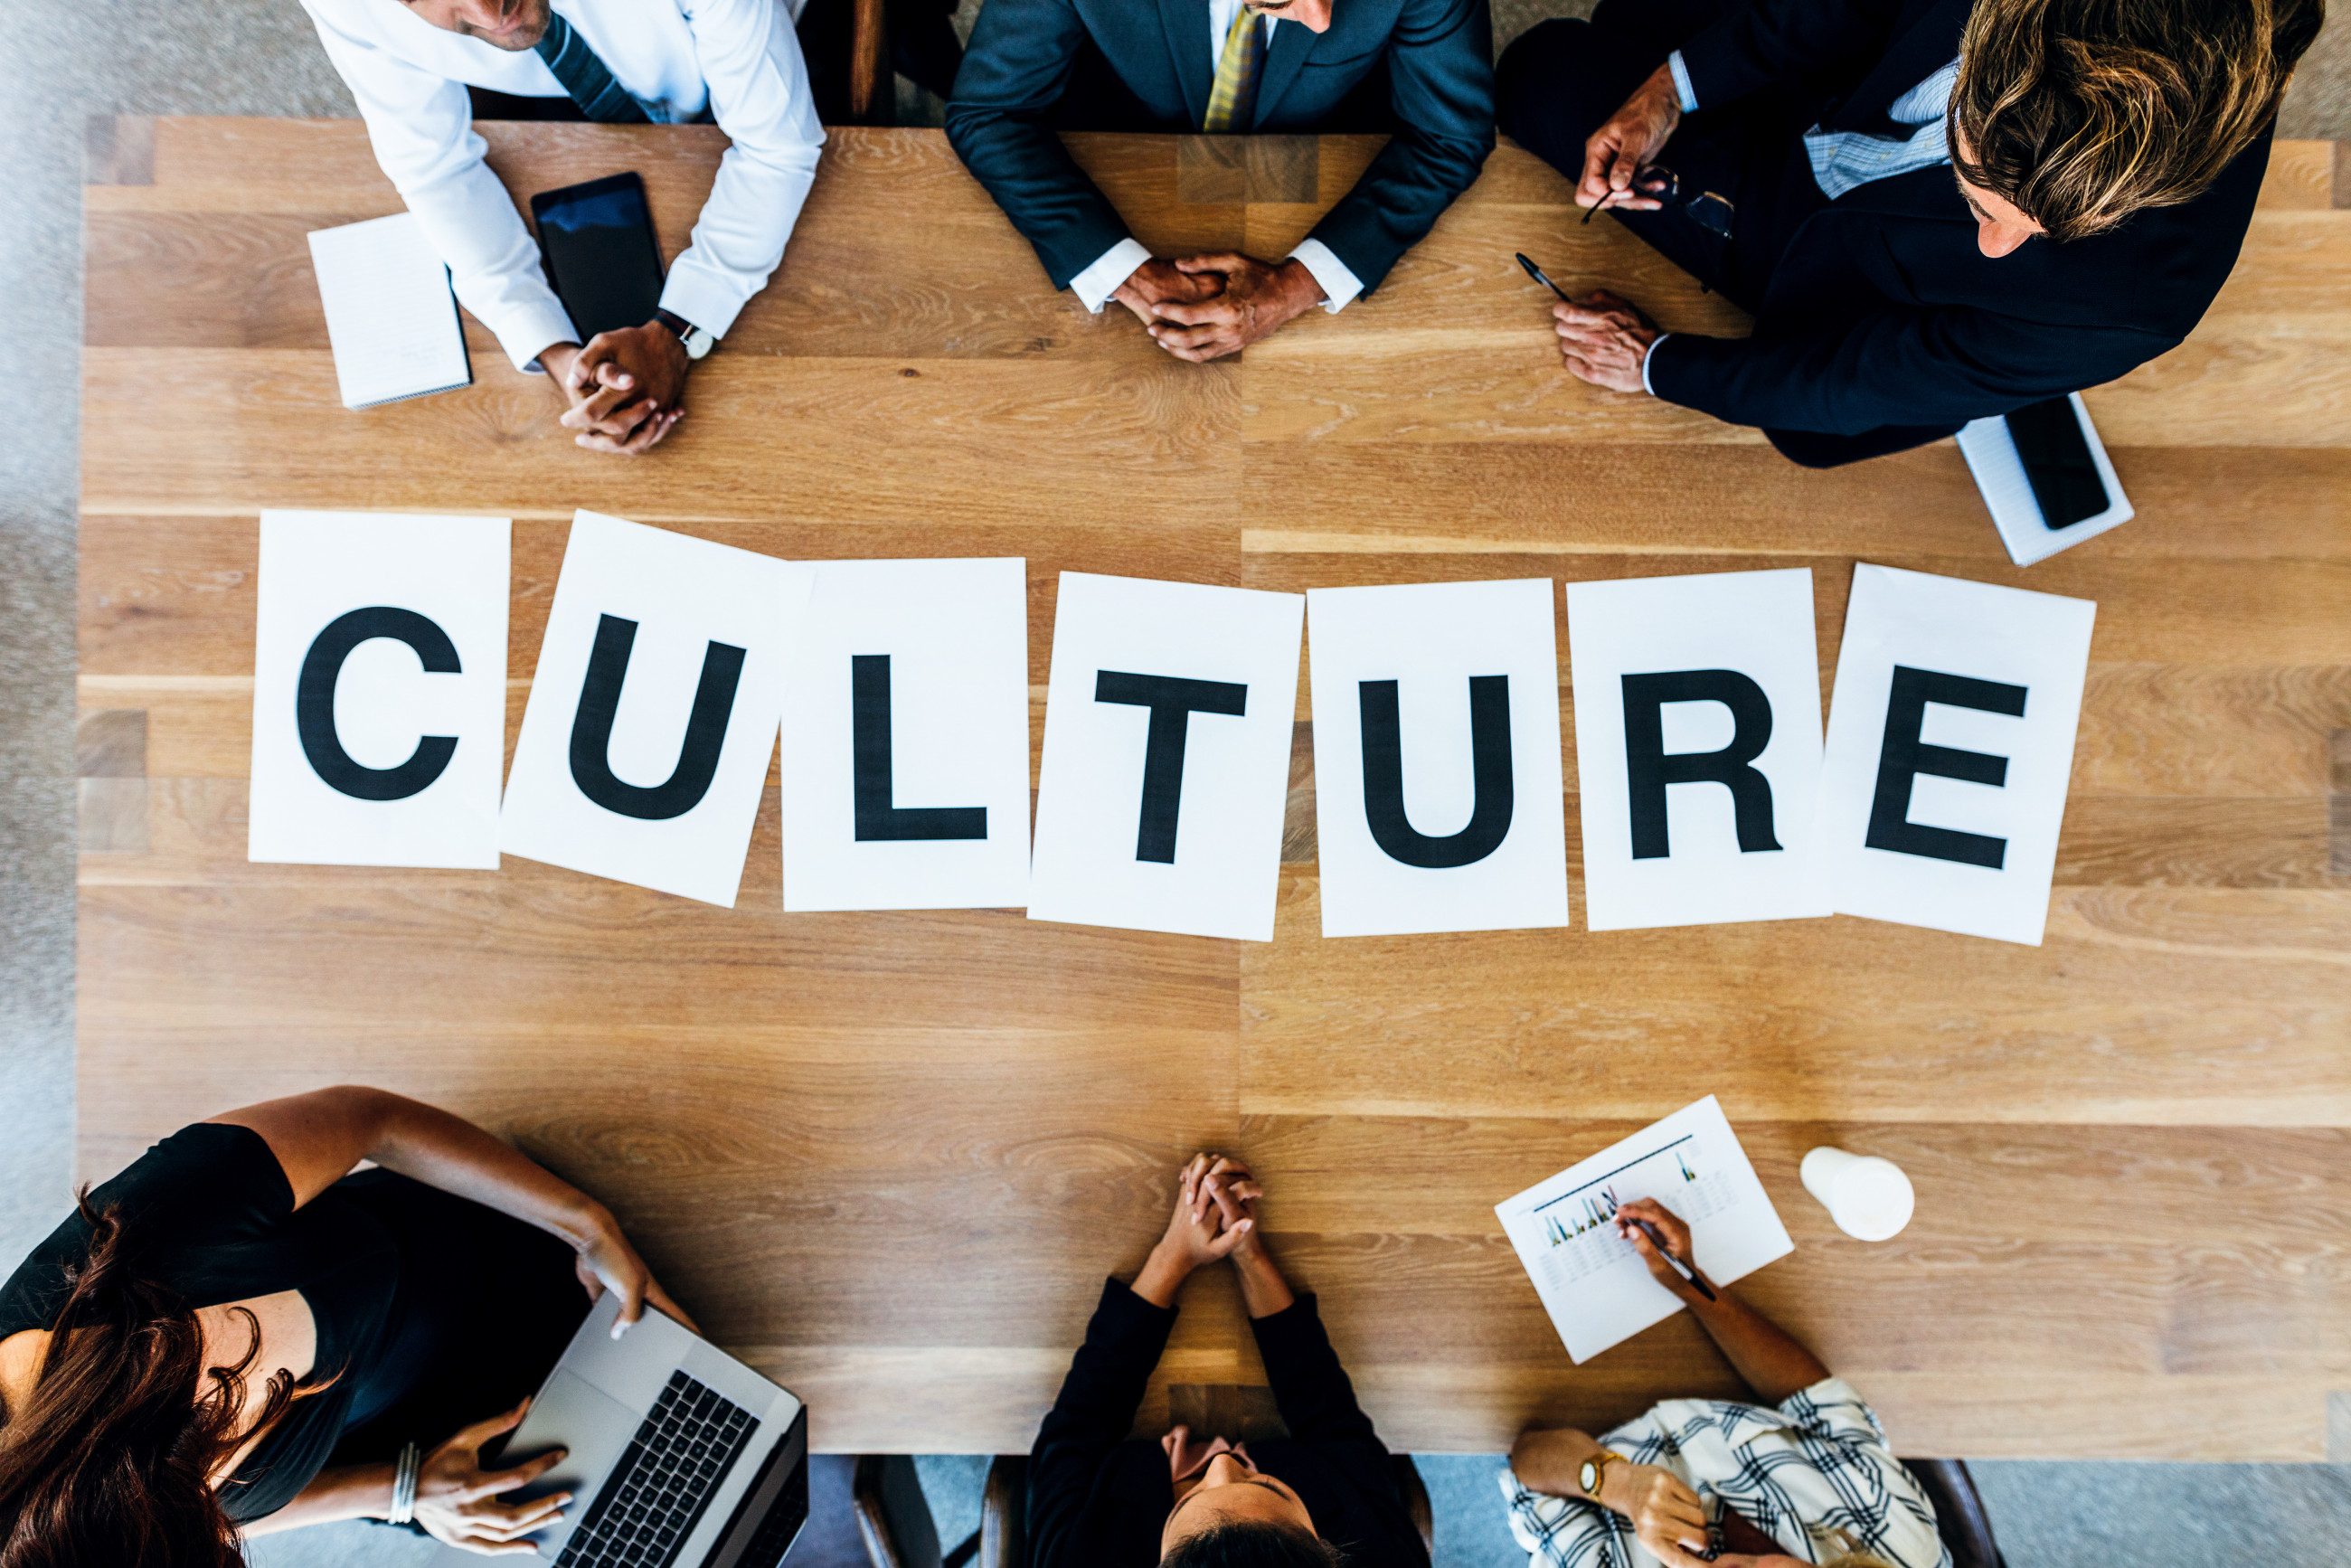 People sitting at a table with white papers spelling 'culture' in large letters